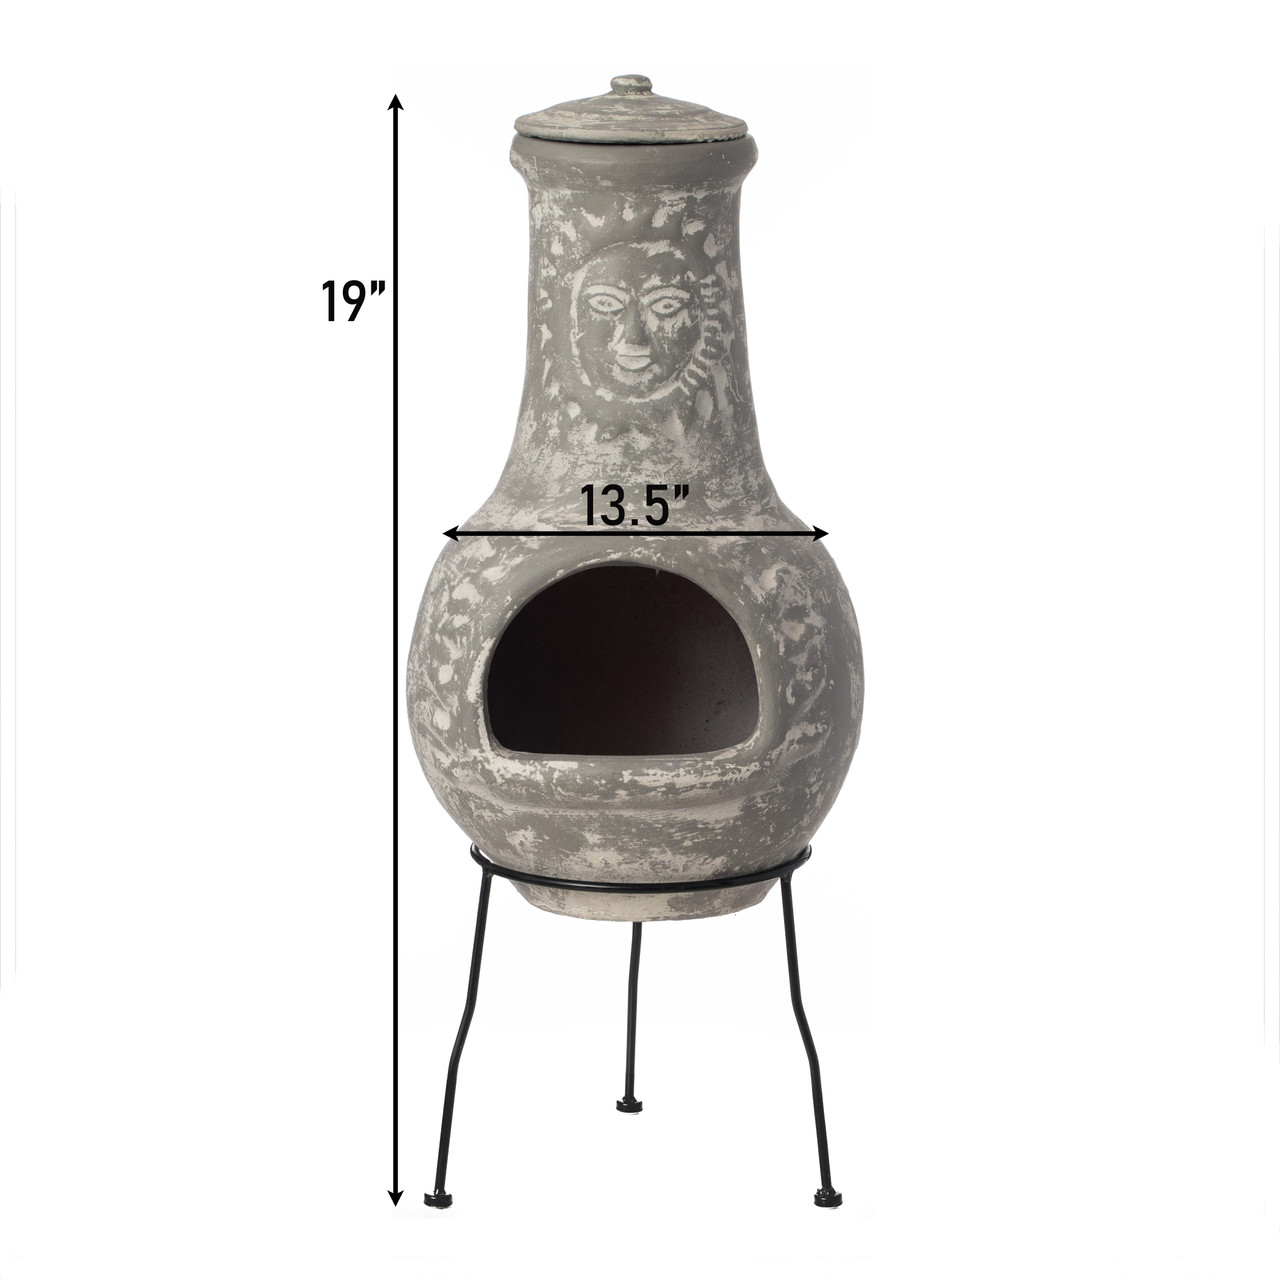 Outdoor Clay Chiminea Fireplace Sun Design Wood Burning Fire Pit with ...